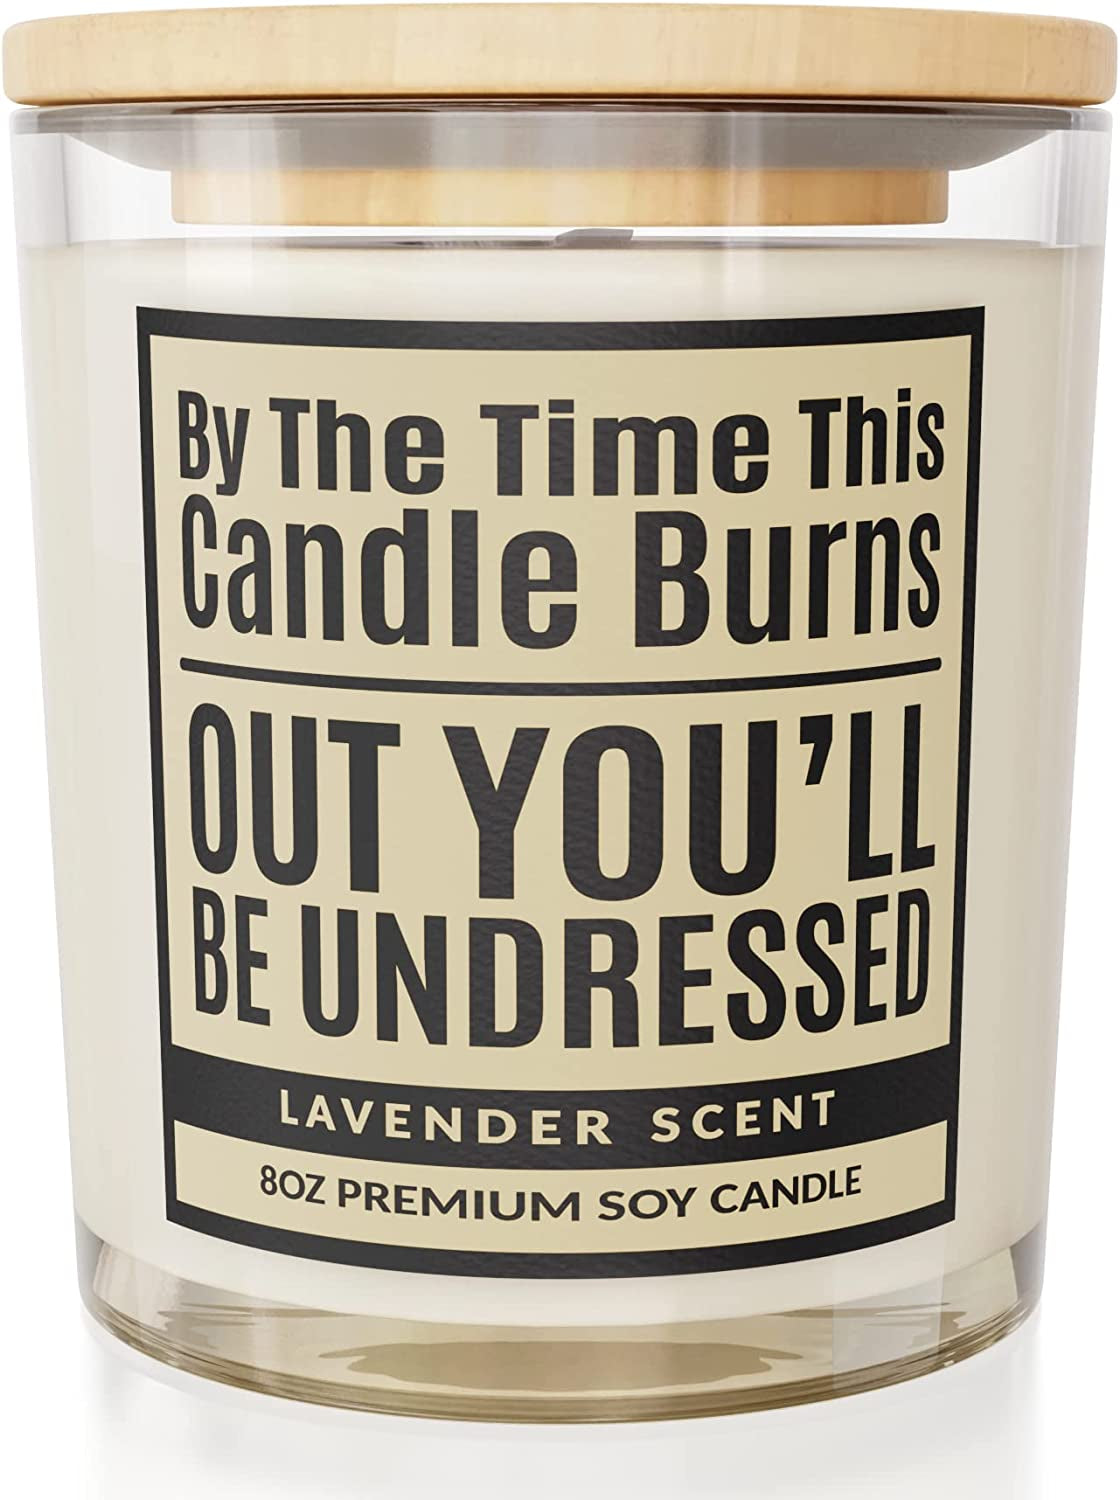 Funny Candles for Men & Women - Lavender Scented 